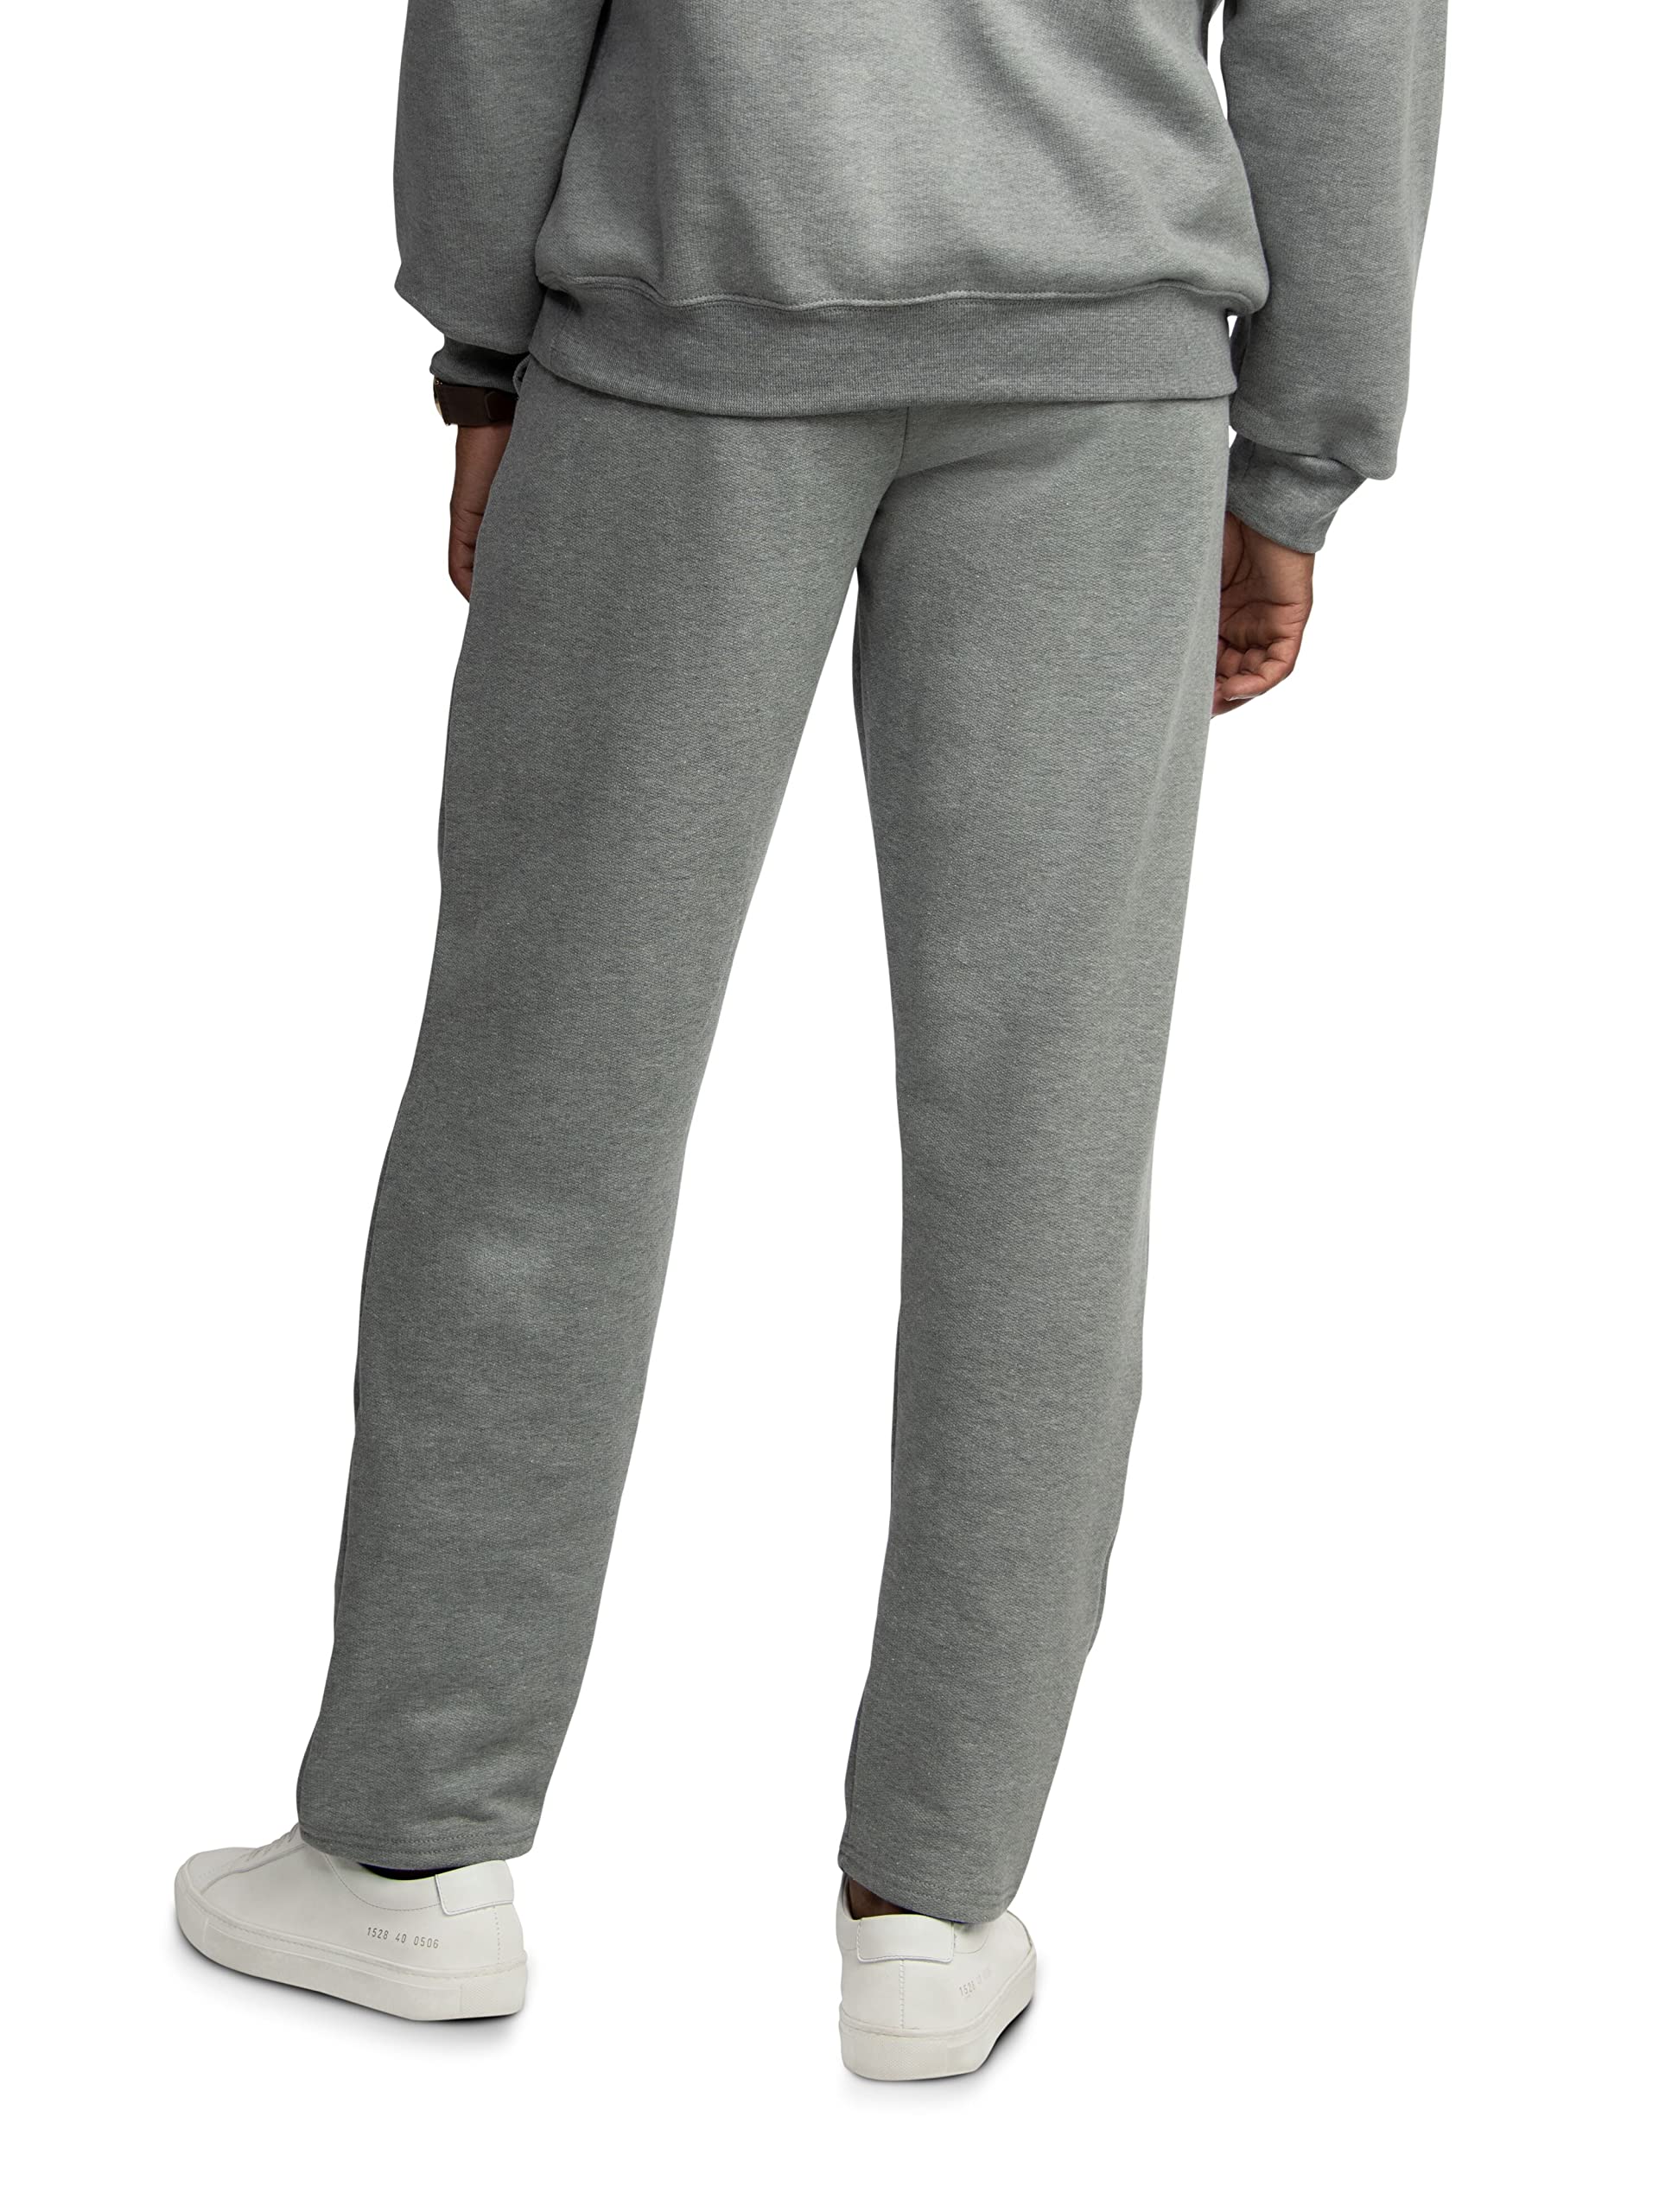 Fruit of the Loom Men's Eversoft Fleece Open Bottom Sweatpants with Pockets, Relaxed Fit, Moisture Wicking, Breathable, Grey Heather, X-Large